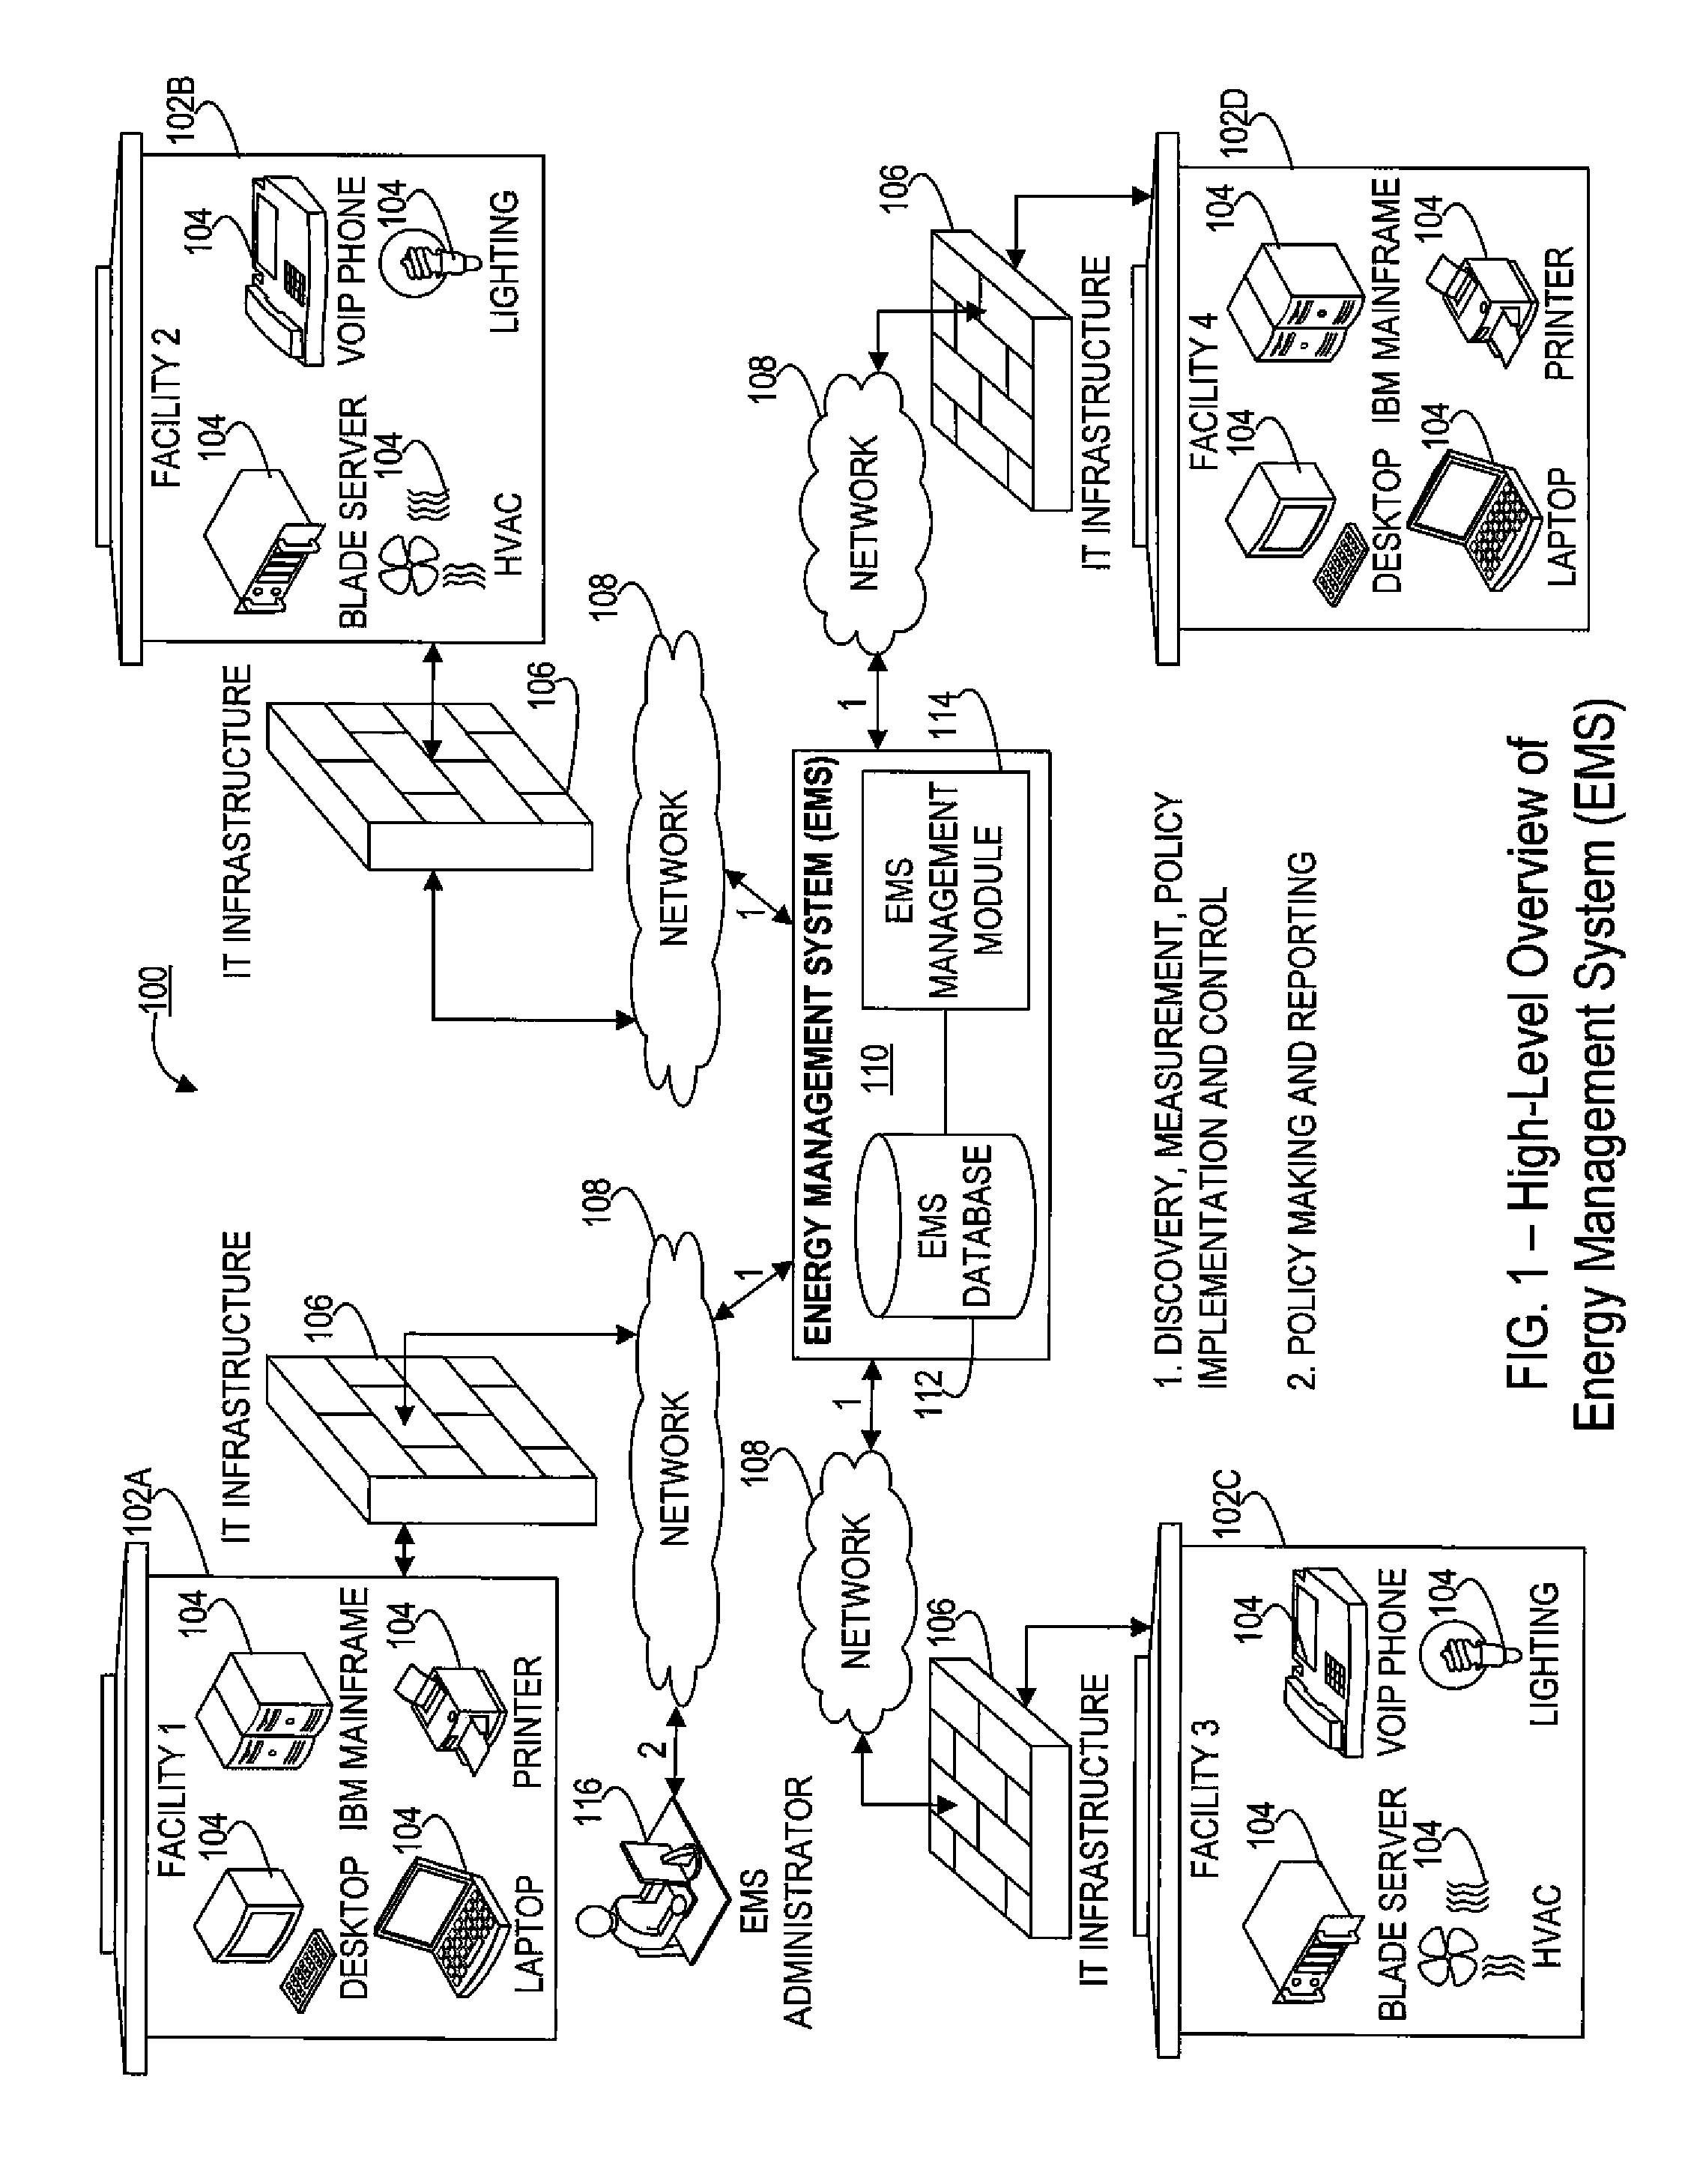 System and methods for sustainable energy management, monitoring, and control of electronic devices